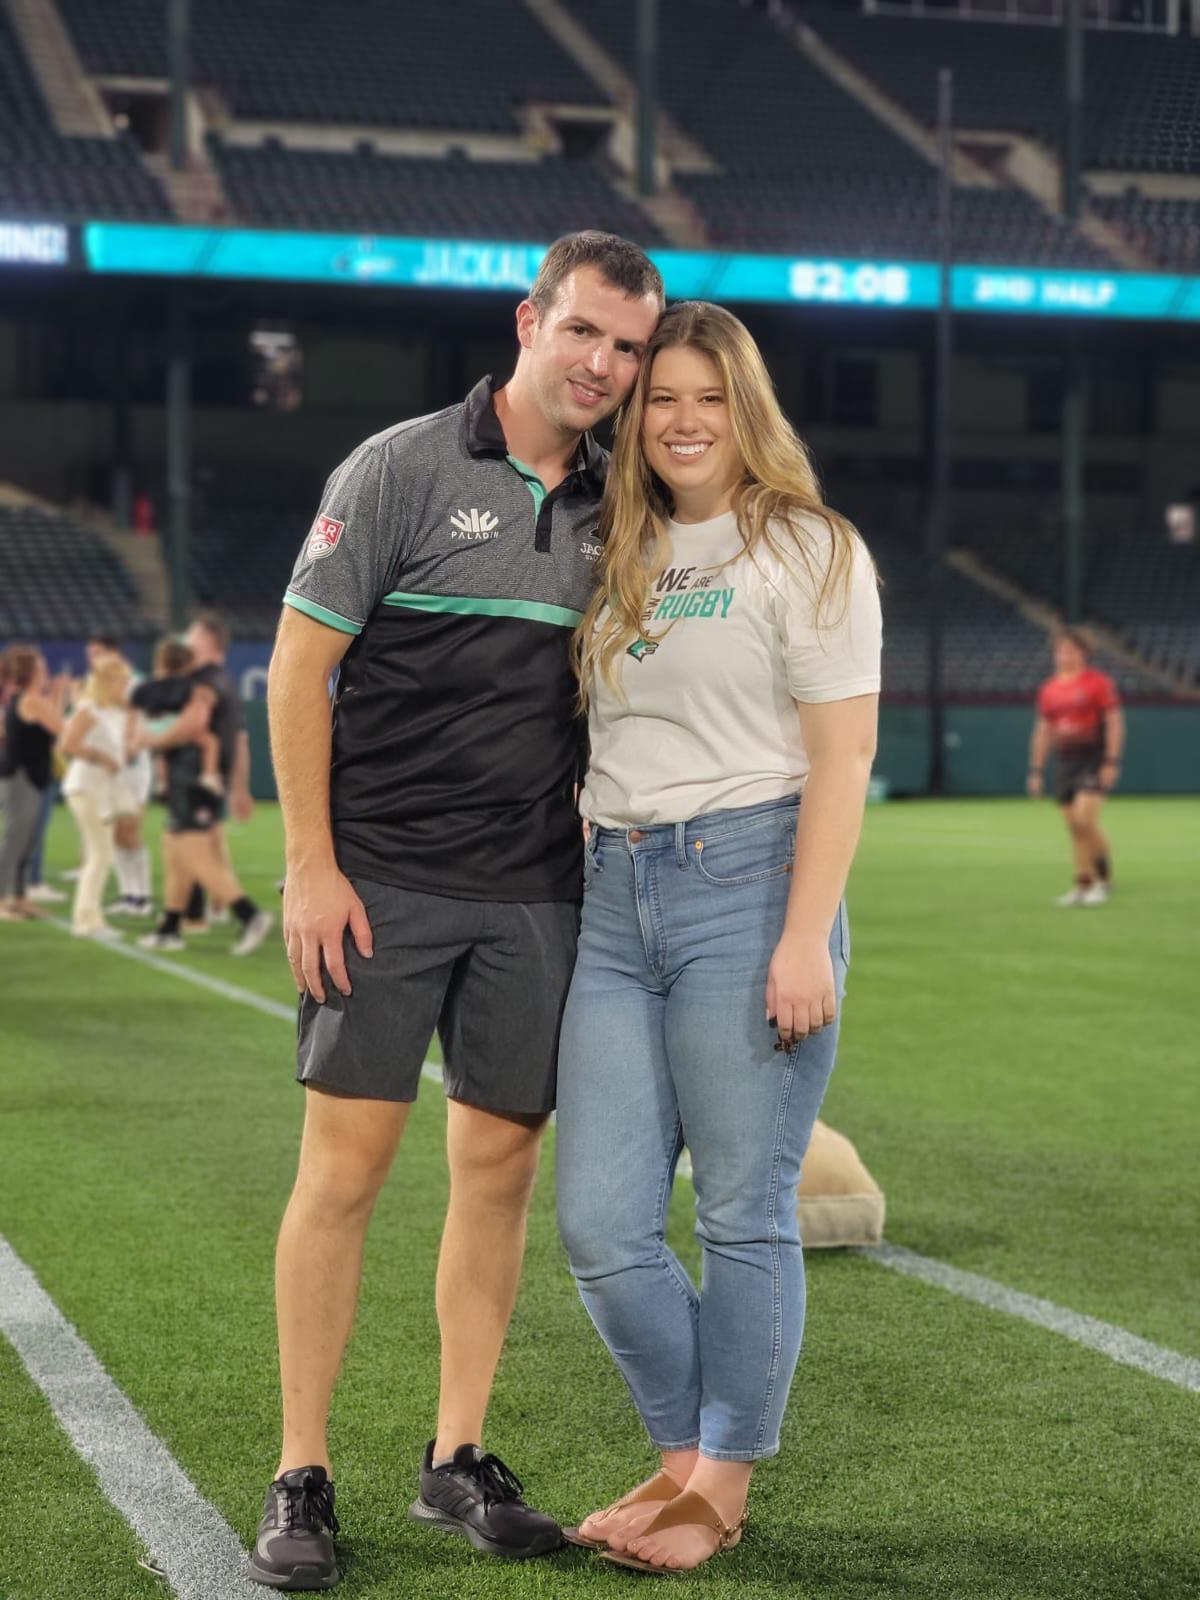 We did six months of long distance when Zach took a job with the Dallas Jackals Major League Rugby team. Although the team went 0-16, we had amazing memories in Texas and found great lifelong friends!